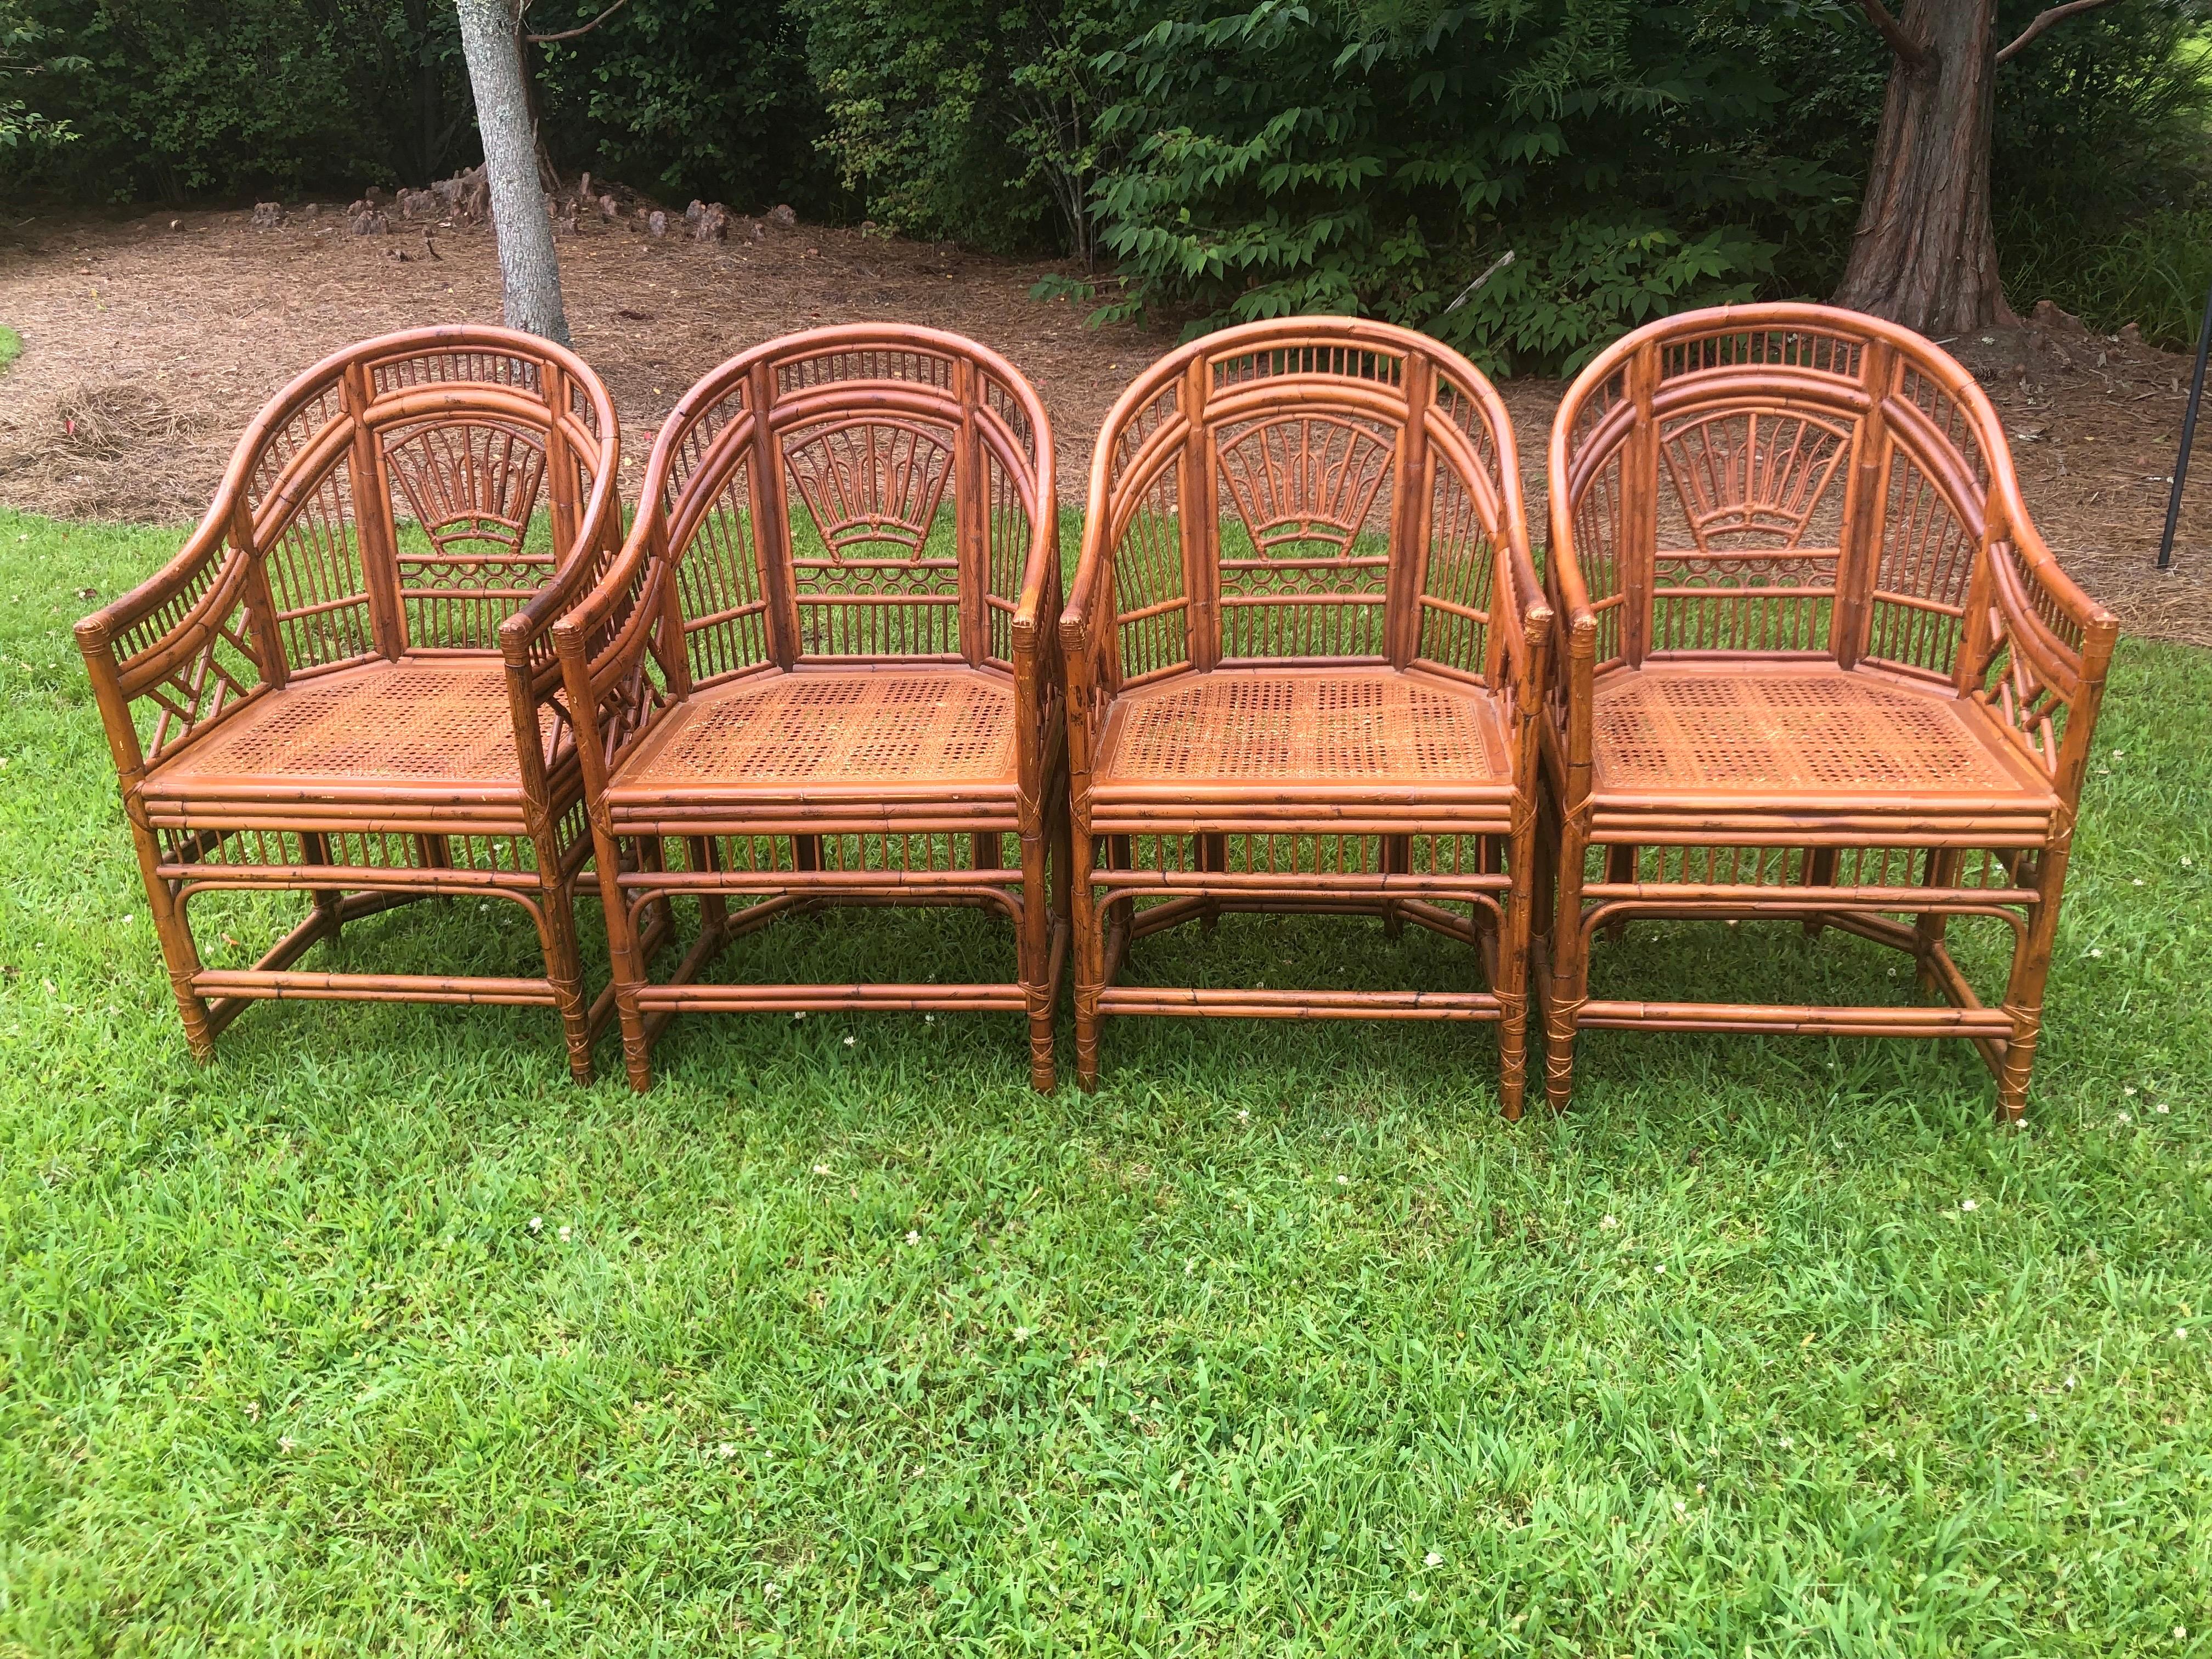 Set of Four Vintage Brighton Pavilion Style Chinese Chippendale Rattan and Split Reed Chairs with Caned Seats. Brighton Pavilion refers to the Royal Pavilion in Brighton, England. It is a famous and distinctive building with architectural and design